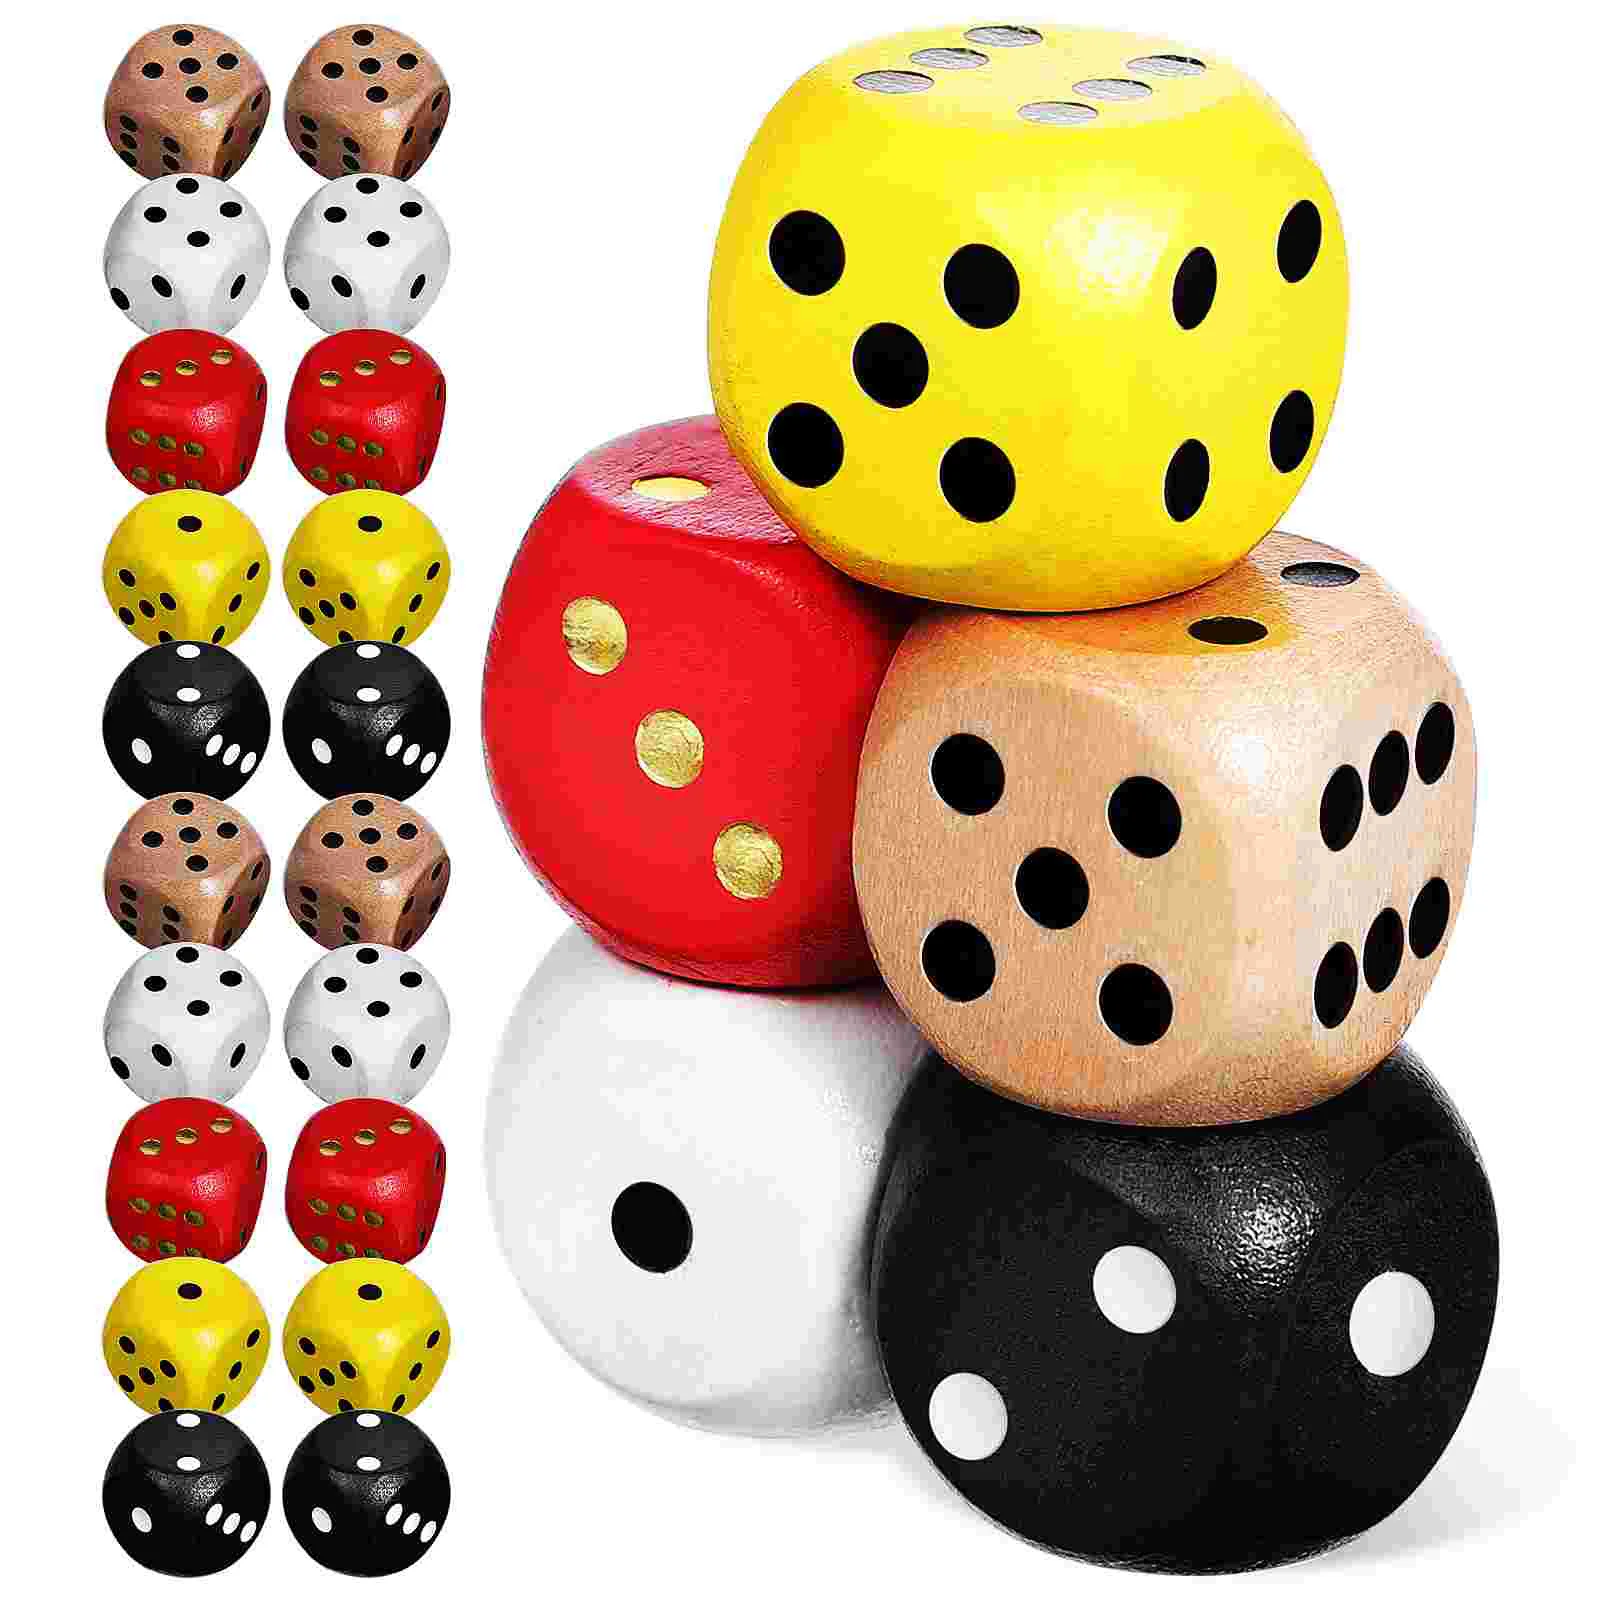 

Sides Dices Game Dices 16mm Point Cubes Round Corner Party Dice Wooden Multi-Sided Prop Dice Parties Supplies